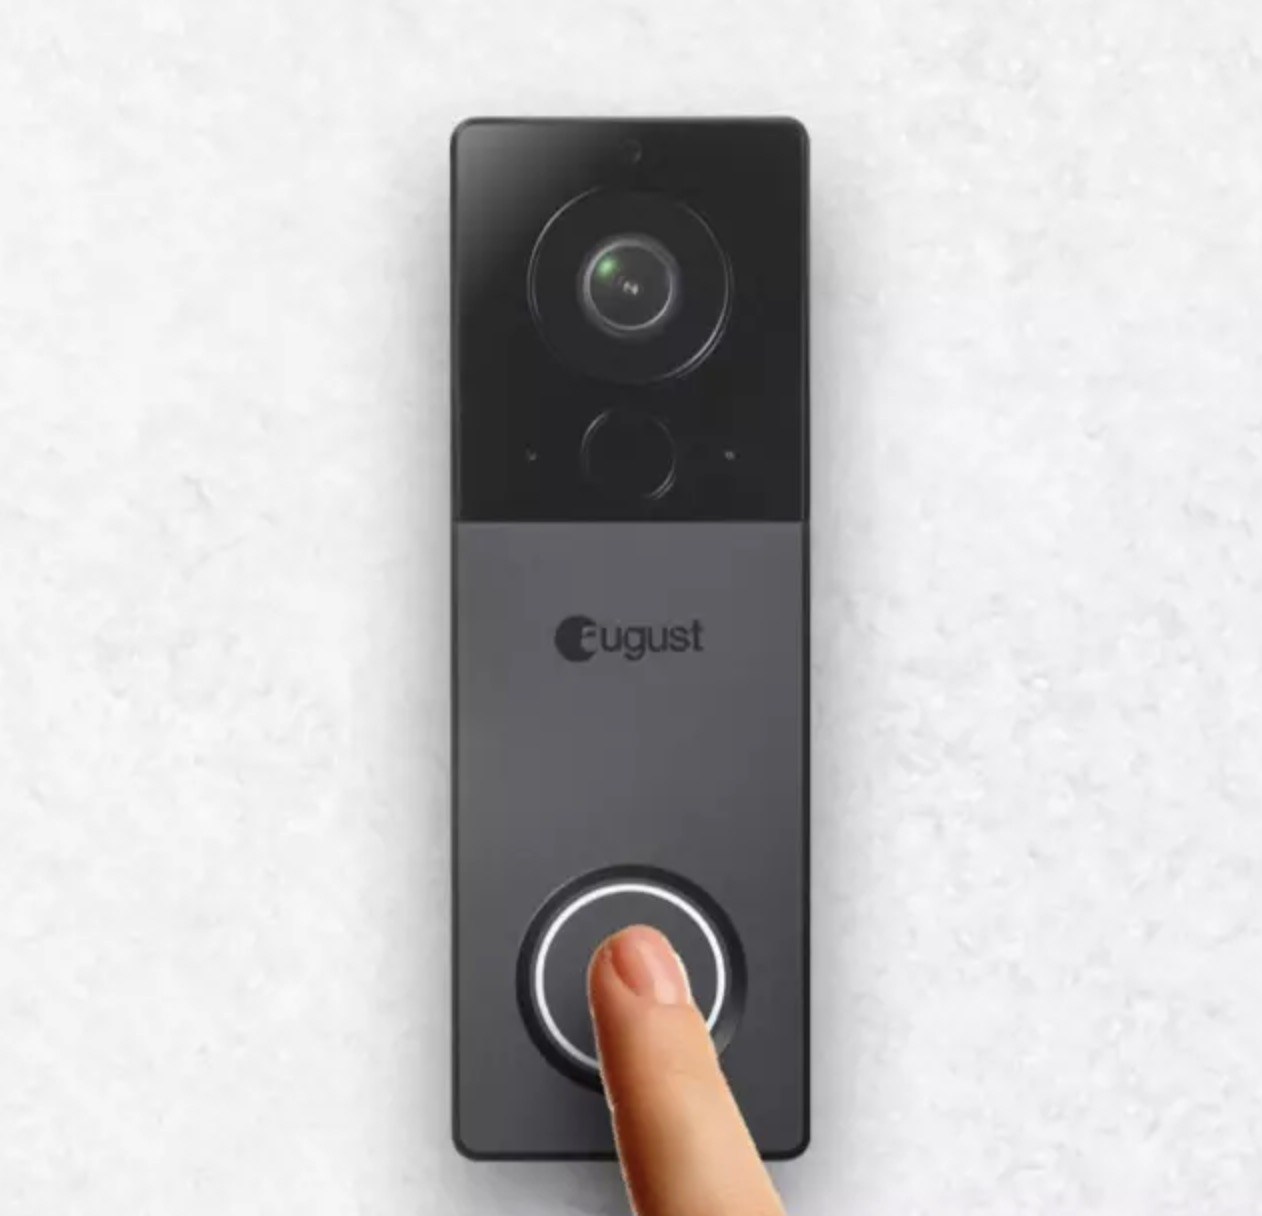 New August &#039;View&#039; Doorbell Leaked [Photo]